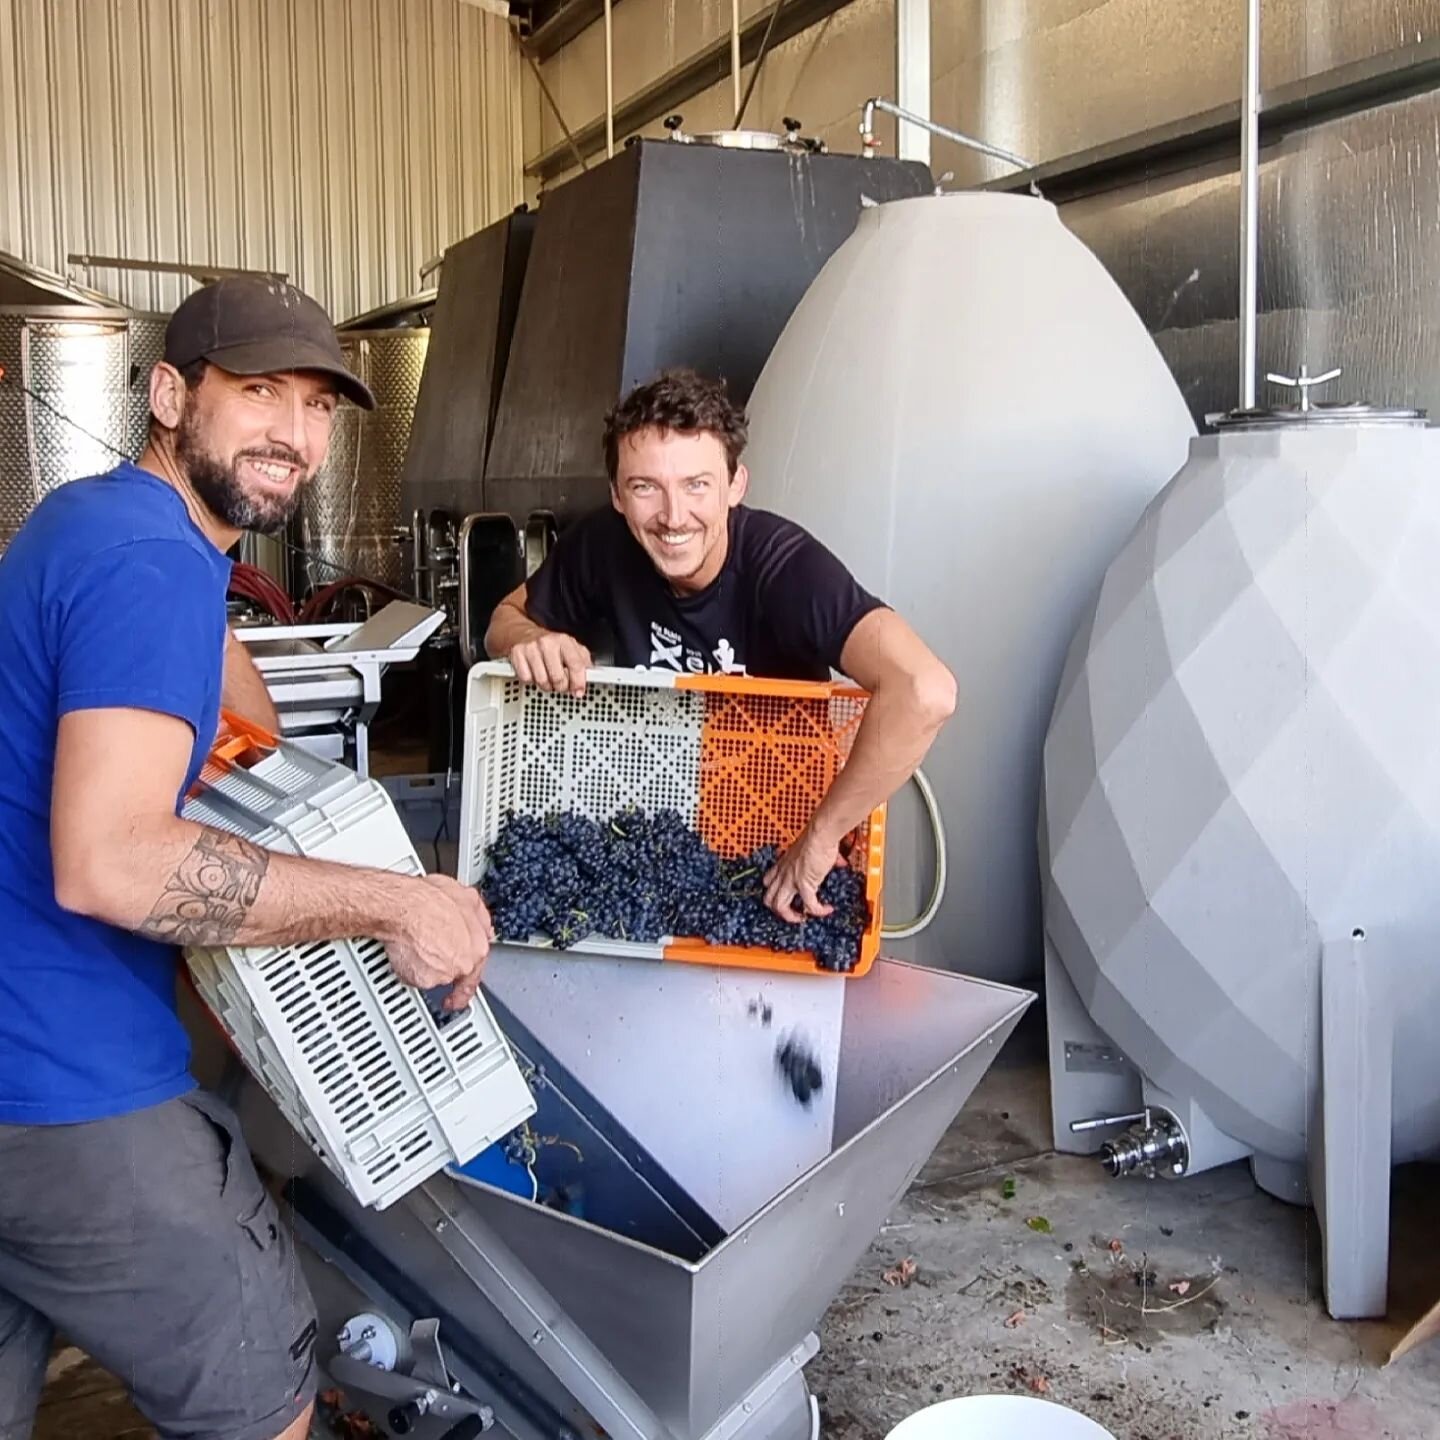 Some happy faces on this first day of our Heathcote harvest. And why not? We're ready! Our Estate vines at Place of Changing Winds are still likely six weeks away from being picked, maybe more,  but the vineyard is all netted and the cellar prepared,